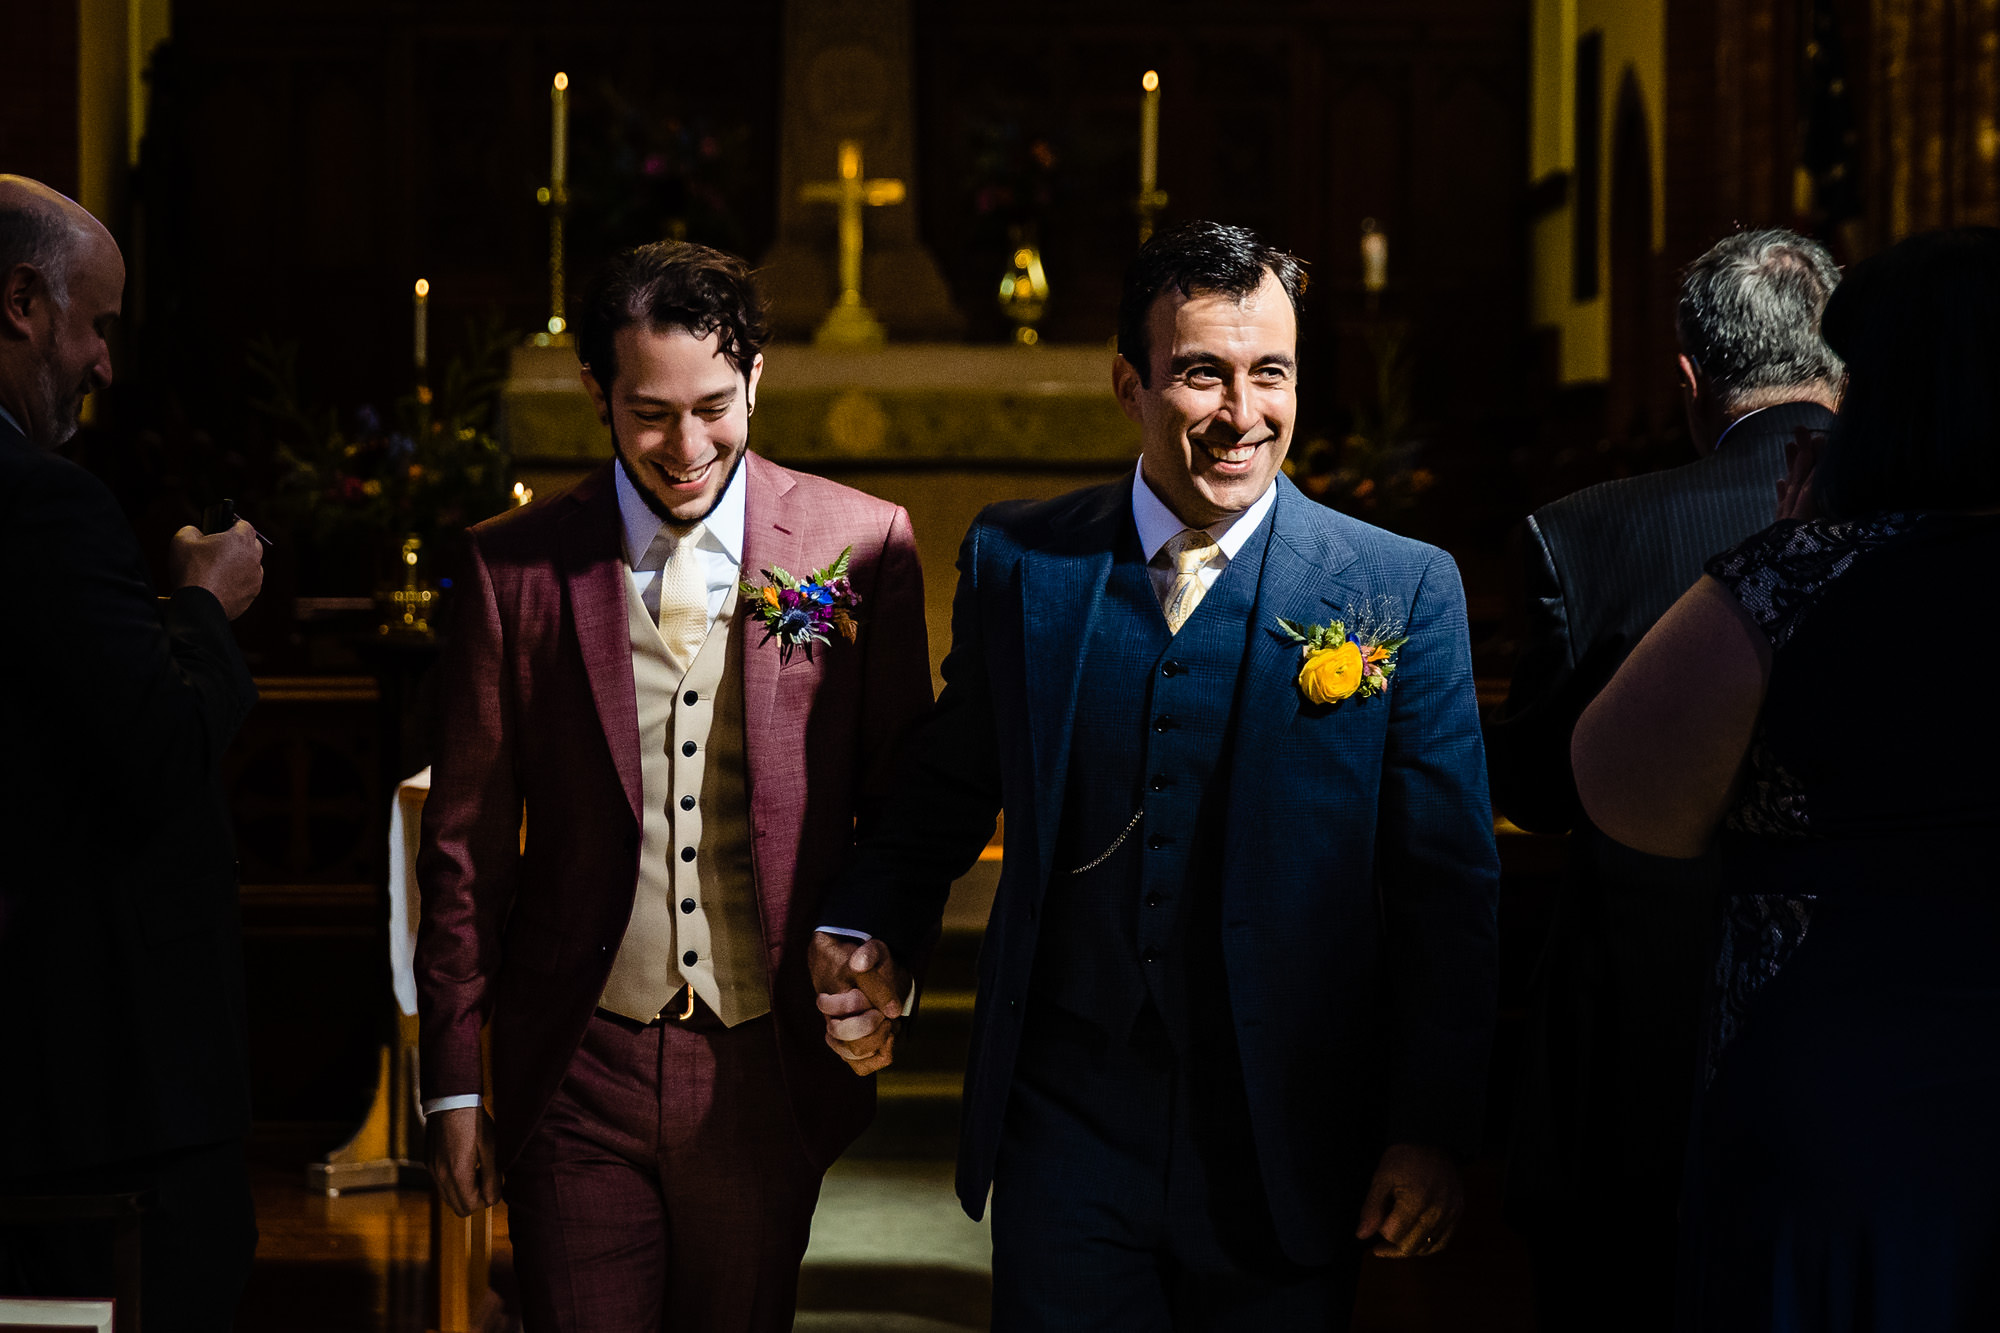 Two grooms are newly married at their St Mary's-By-The-Sea wedding ceremony